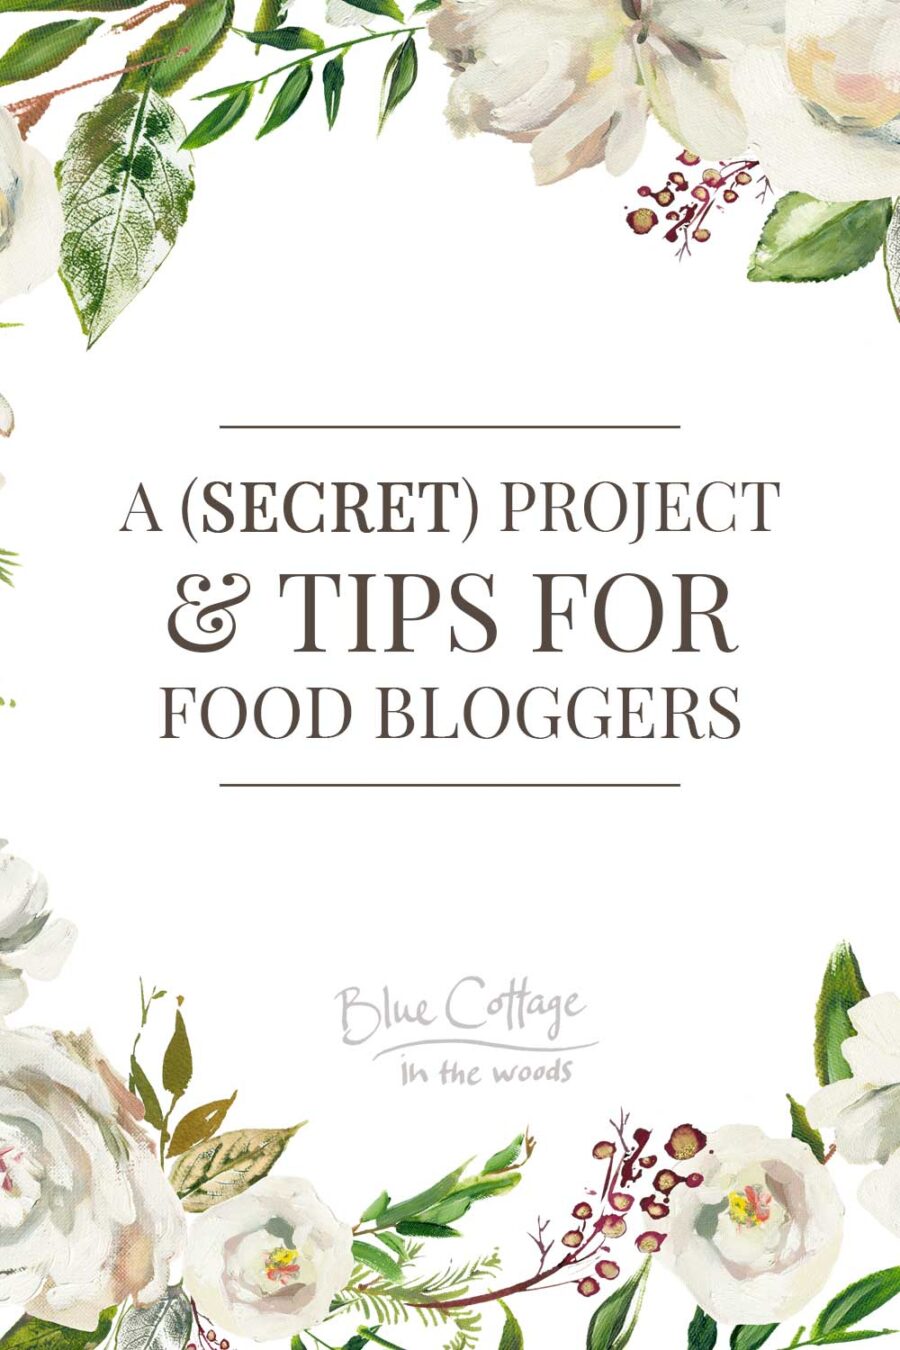 A Secret Project & Tips for Food Bloggers